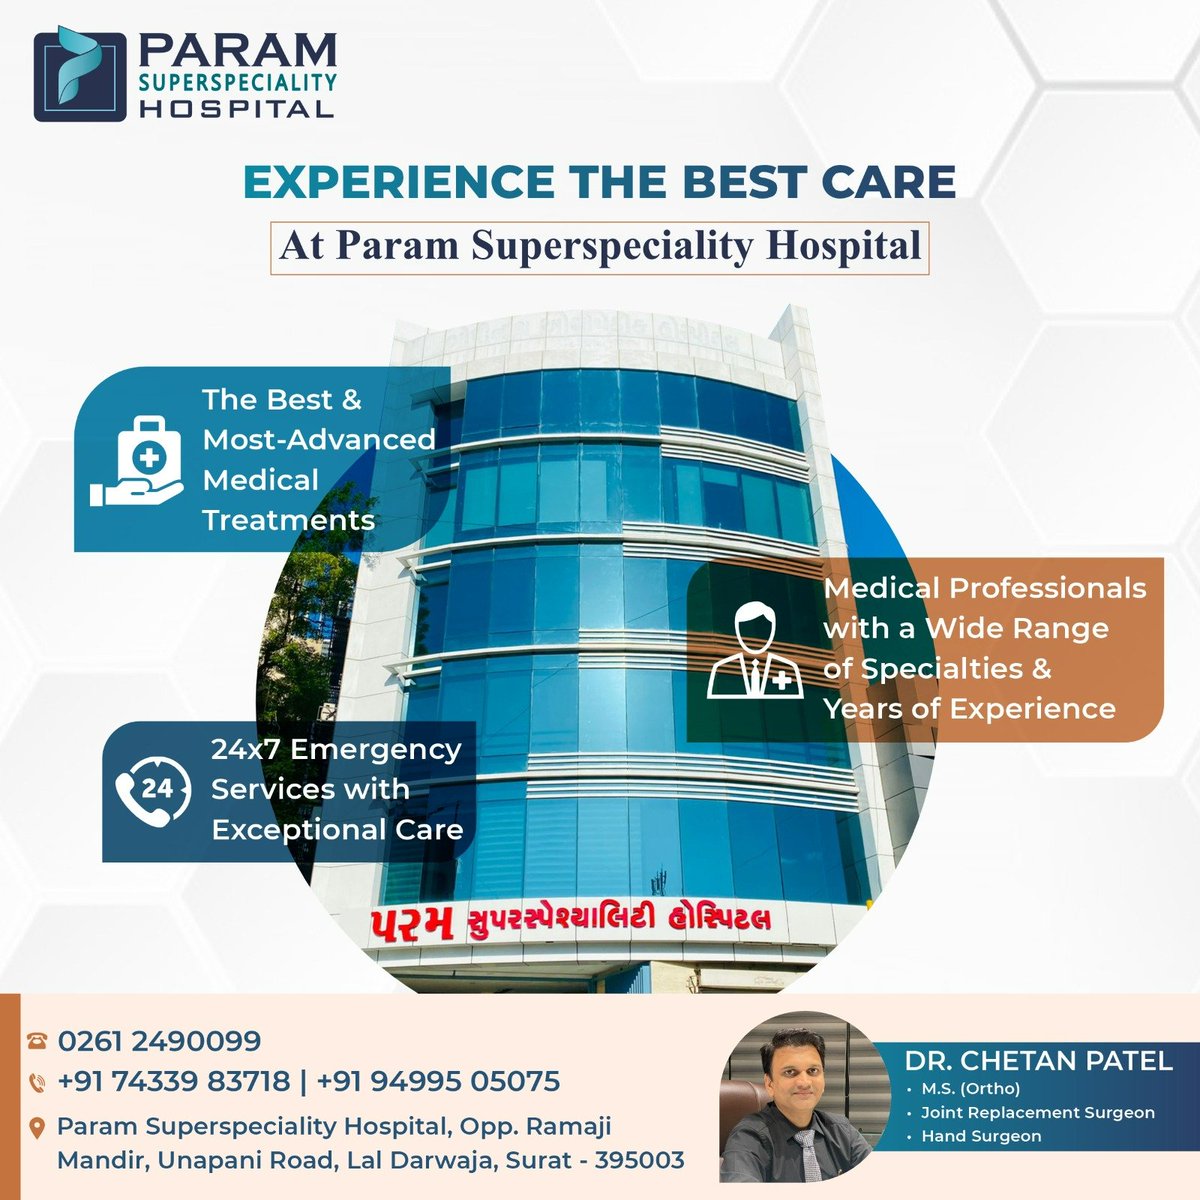 Param Superspeciality Hospital - A foundation of excellence for your health

#ParamSuperspecialityHospital #DrChetanPatel #ParamHospital #OrthopaedicSurgeon #KneeReplacementSurgeon #Pediatricnephrology #Orthopaedic #PaediatricOrthopaedic #CriticalCare #Gastroenterology #Neurology